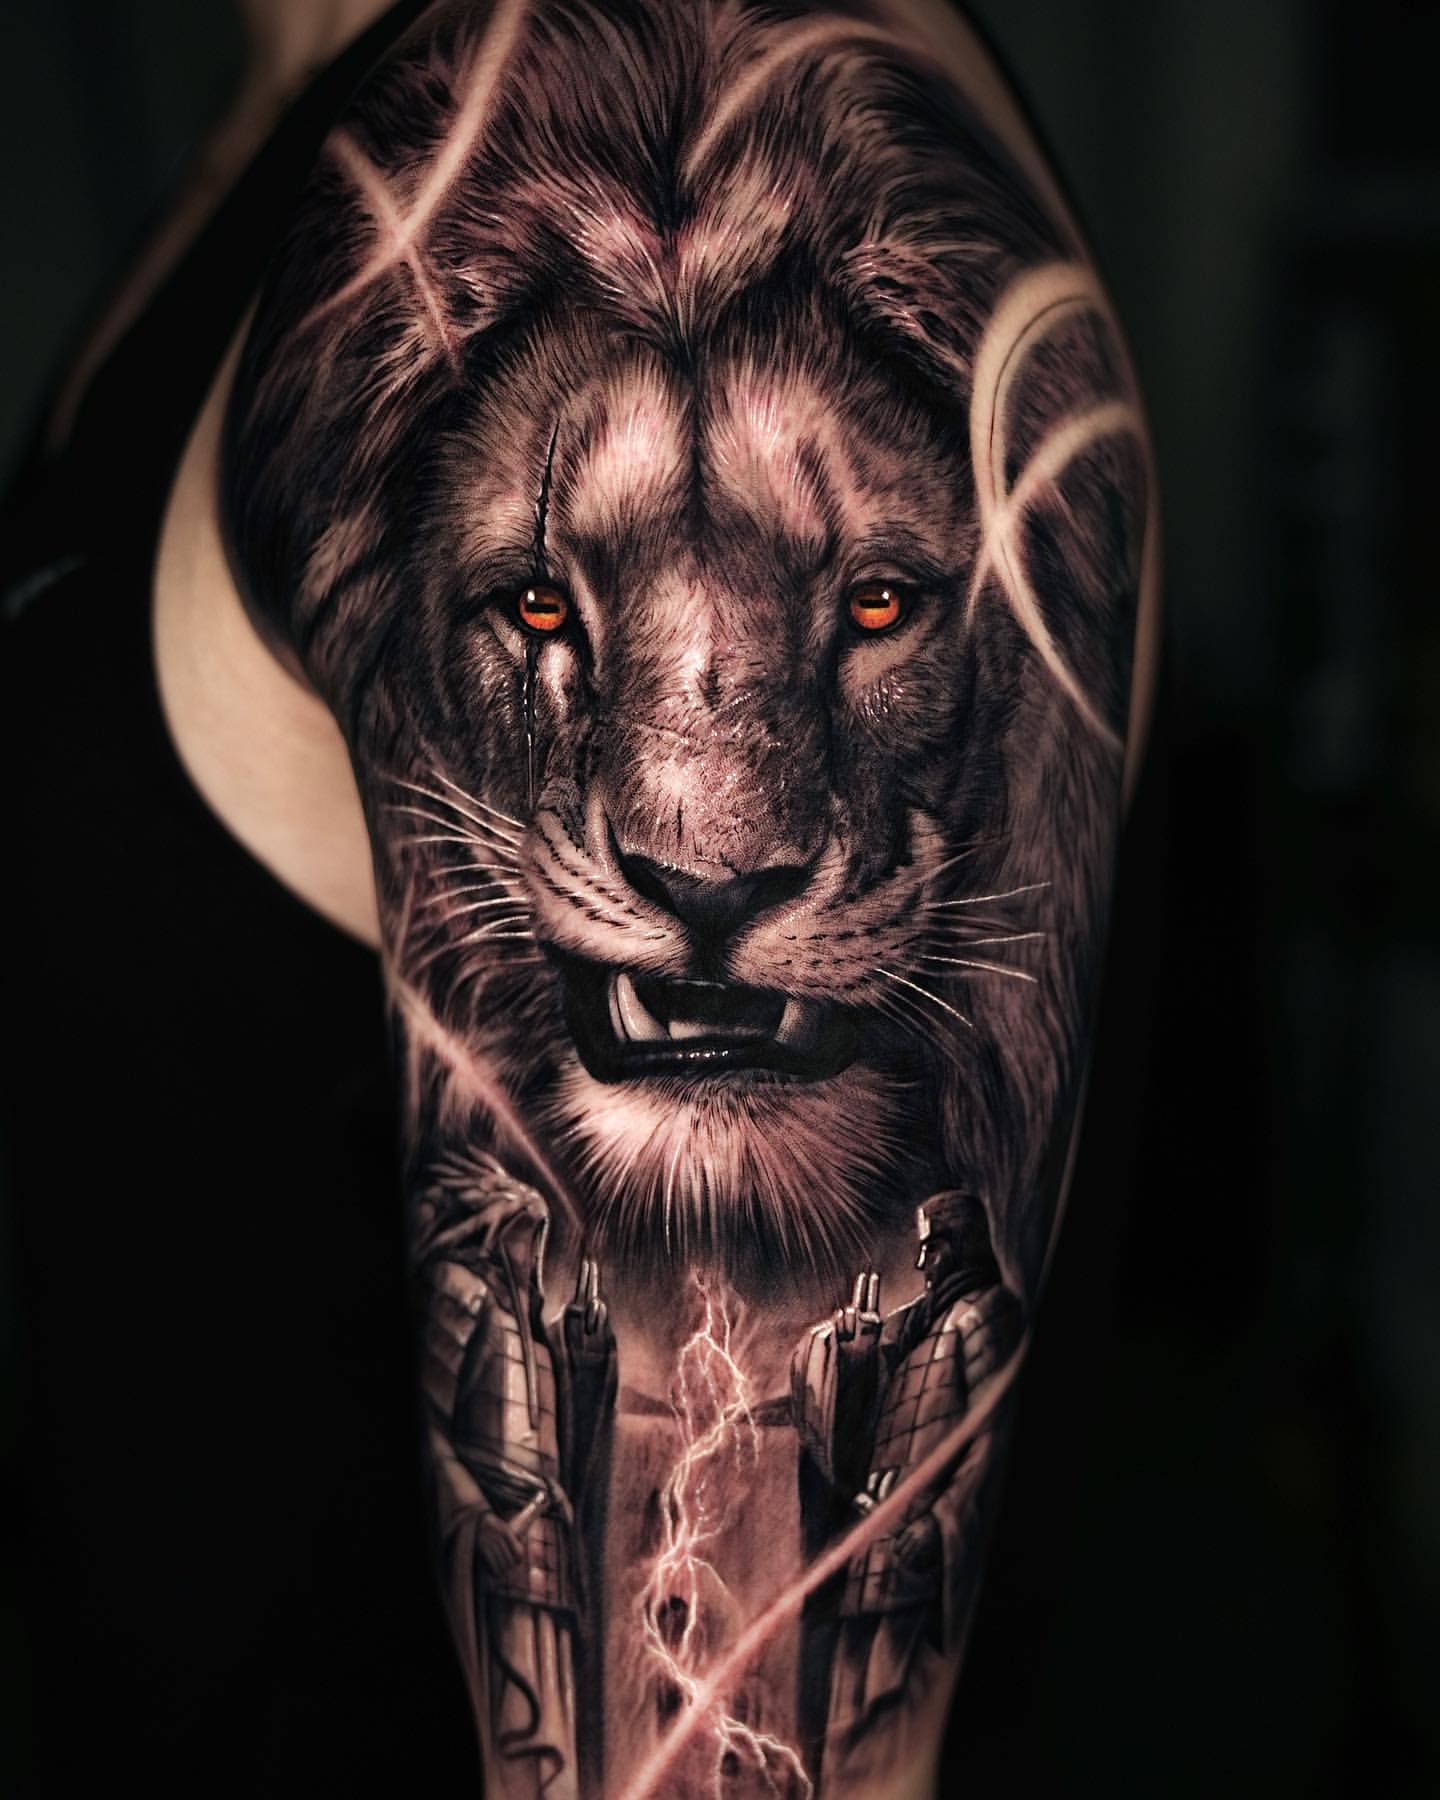 Best-Lion-Tattoo-Design-chest-for-men | Tattoos Center - Tattoo quotes, lion  tattoos, cool tattoo designs and much more!